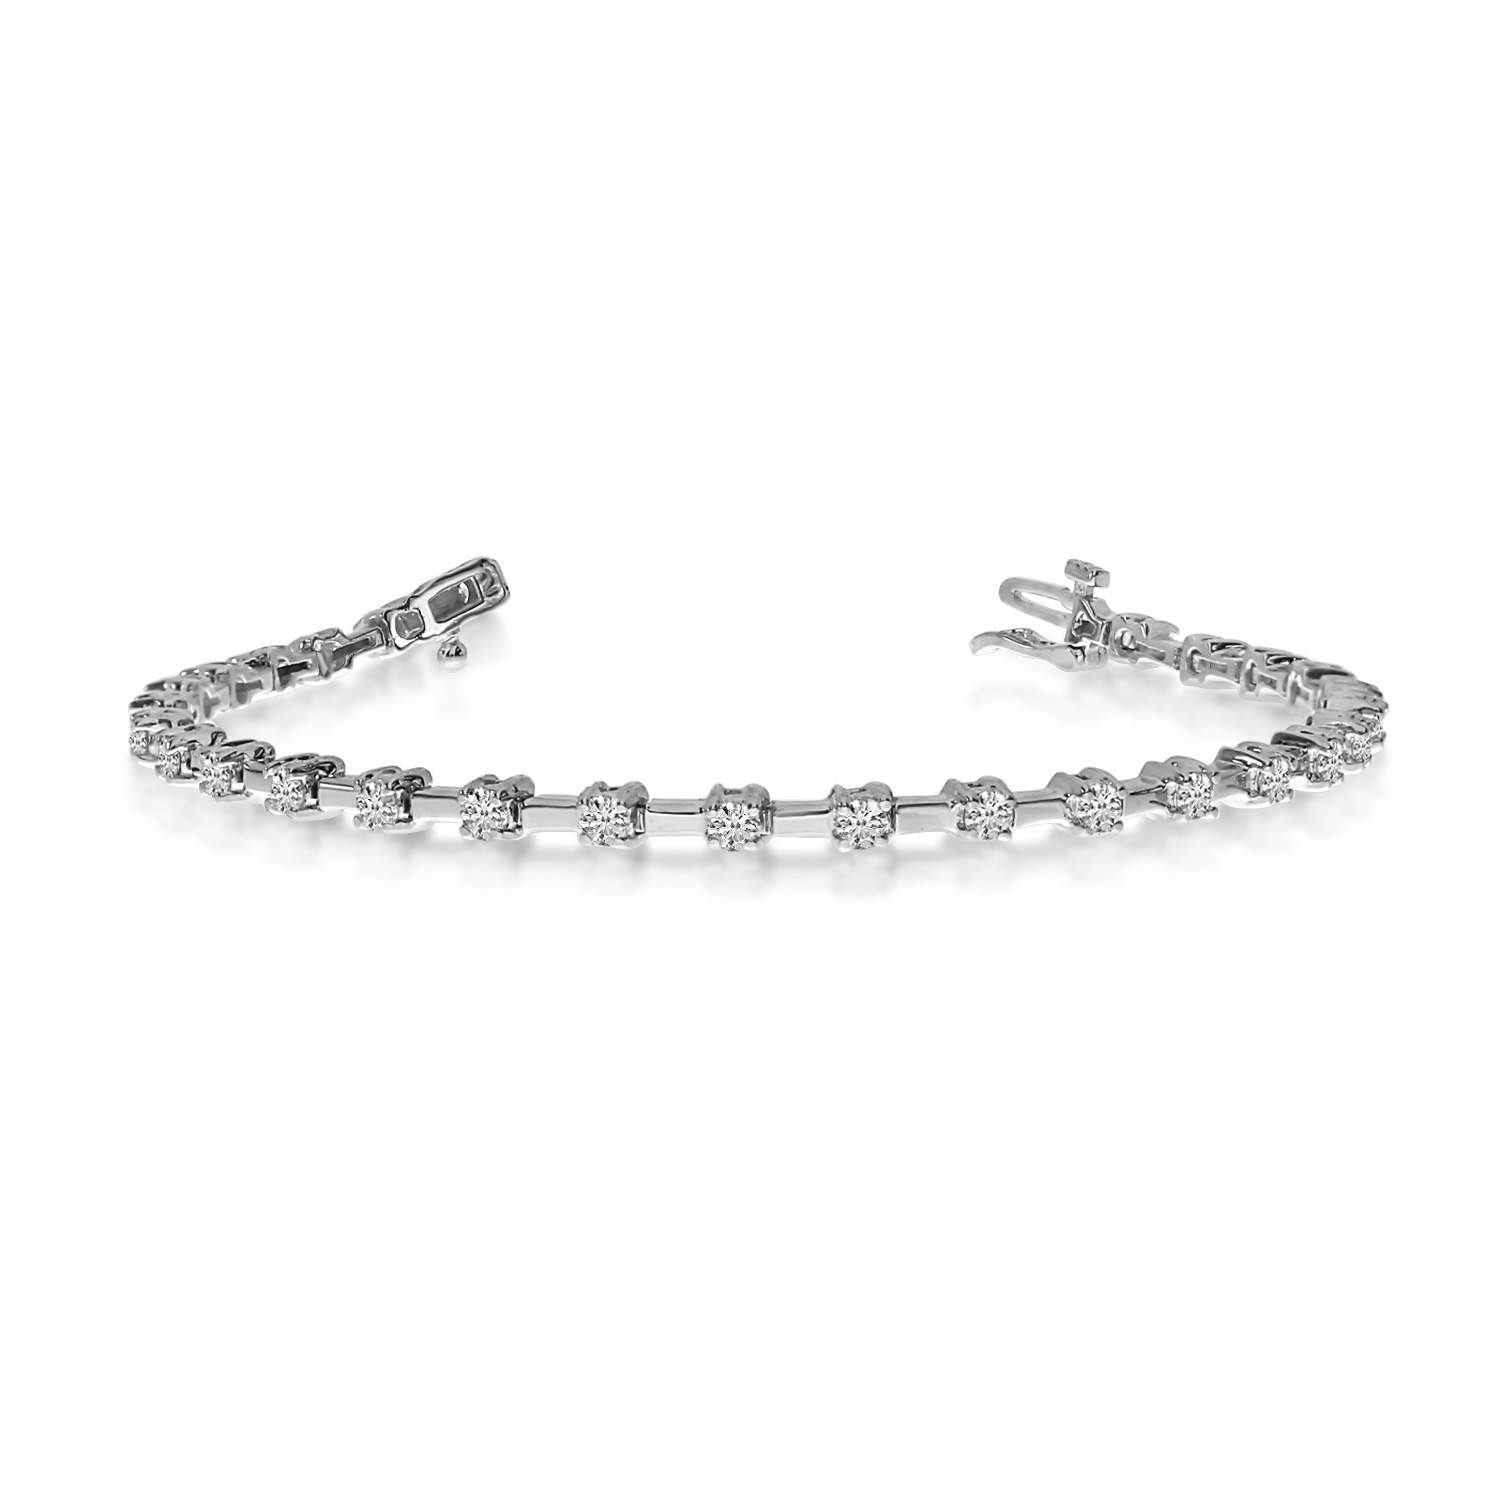 14K solid white gold tennis bracelet with natural round diamonds.  3.00 carat total weight of diamonds.